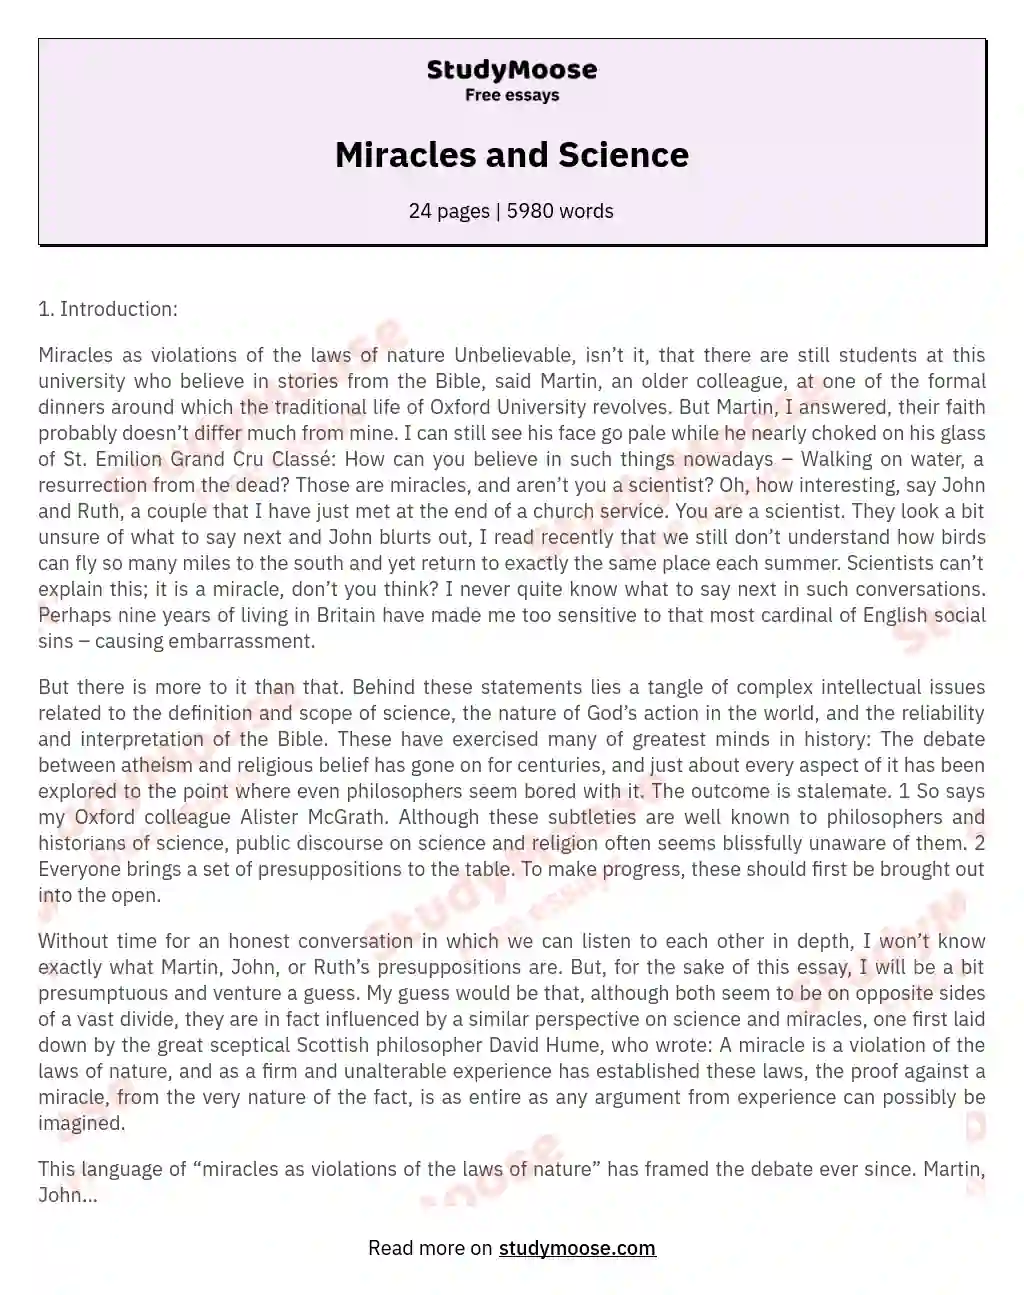 Miracles and Science essay